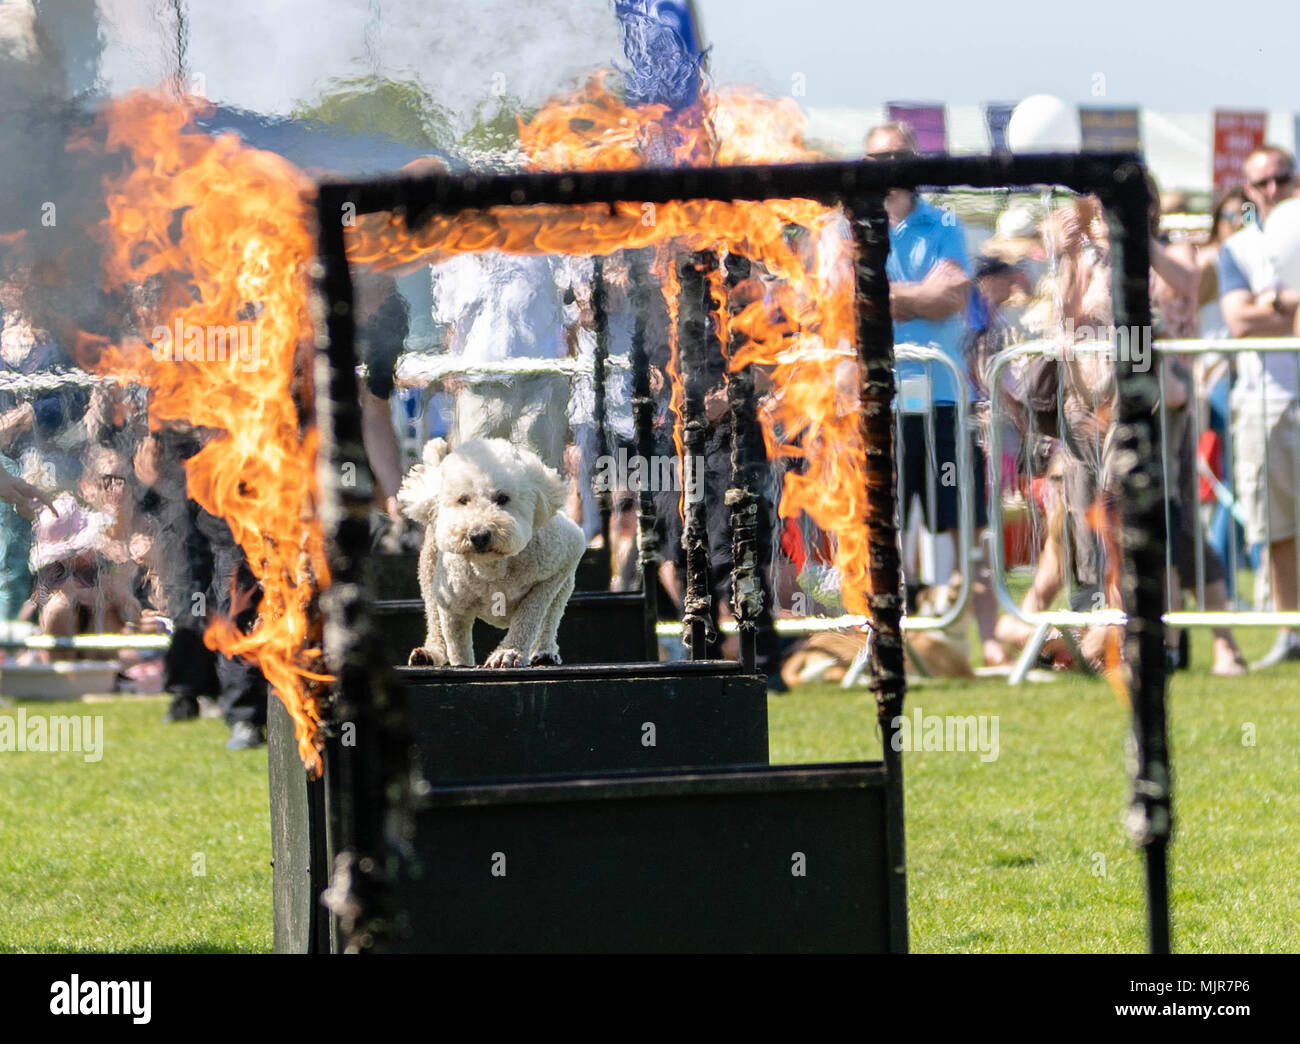 Brentwood, Essex 6th May 2018 A dog jumps through burning hoops at the All about Dogs show, Brentwood, Essex, Credit Ian Davidson/Alamy Live News Stock Photo